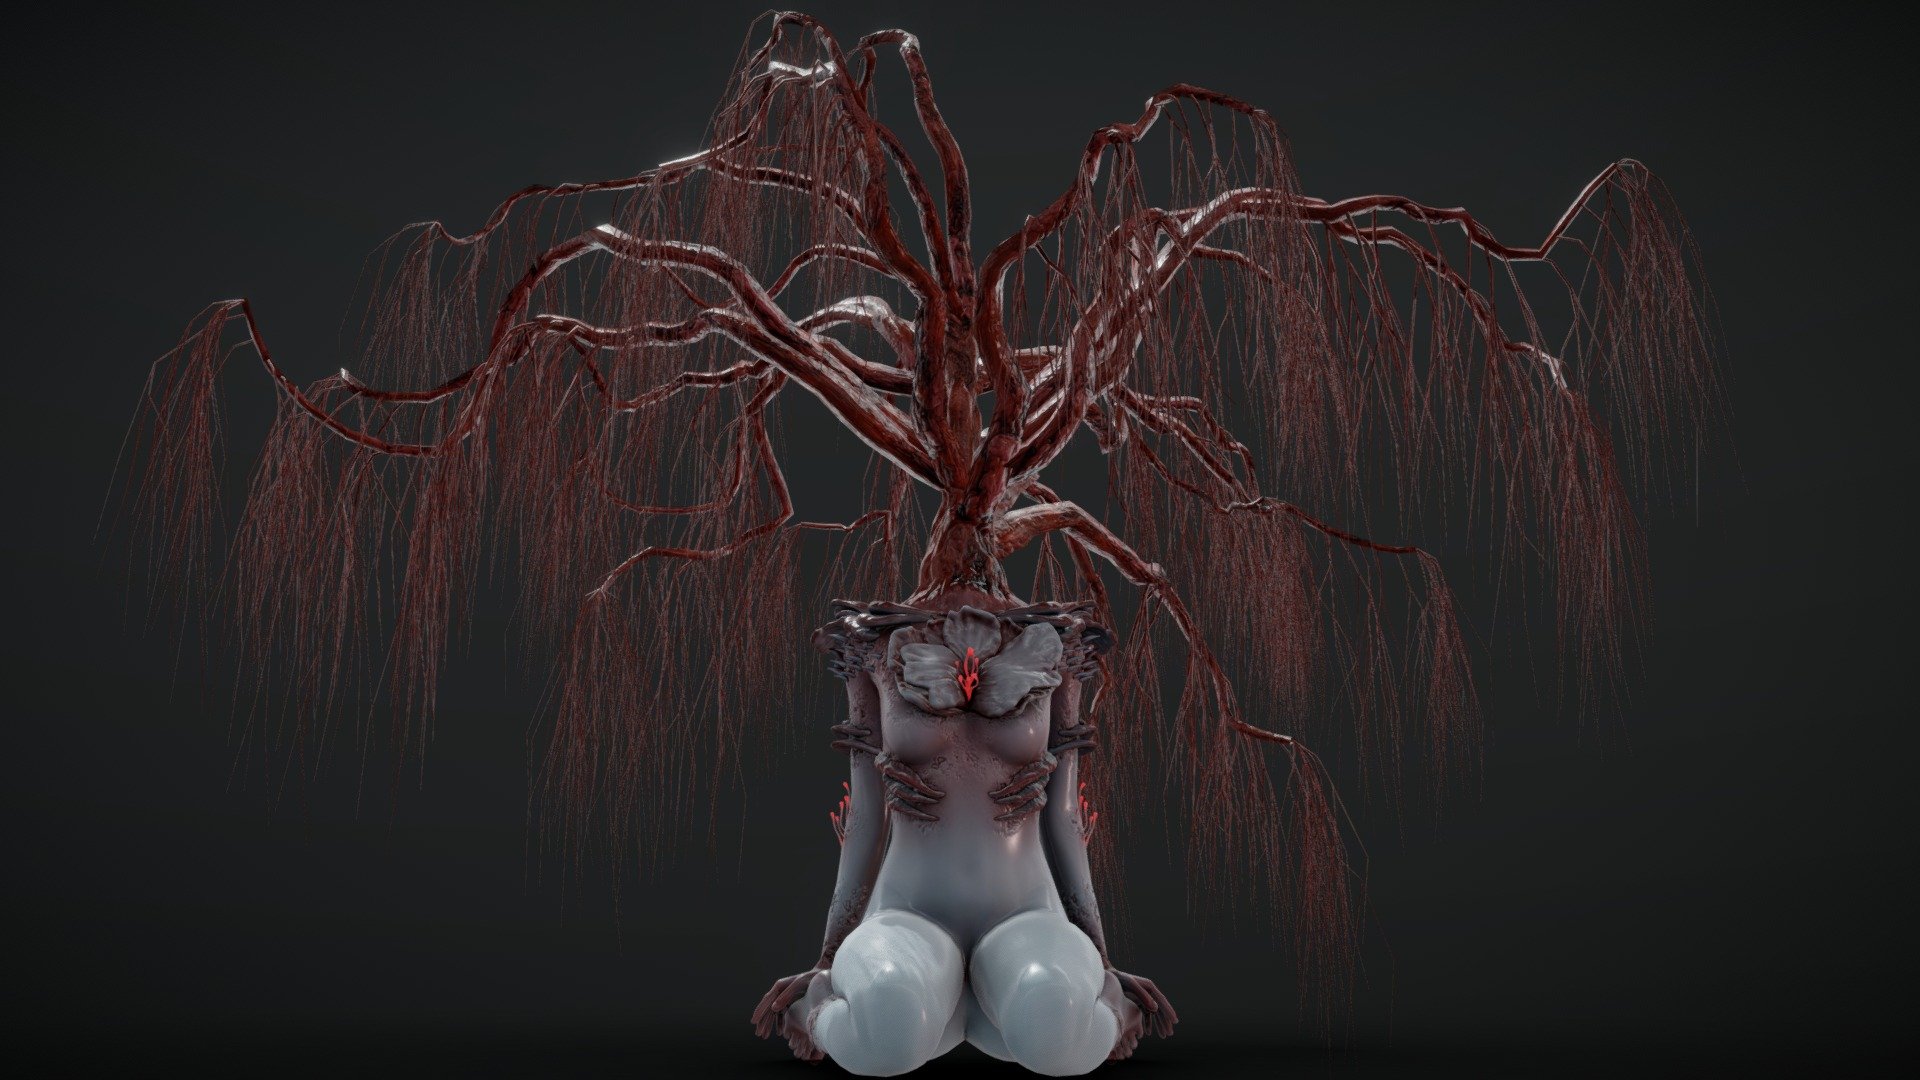 so this was a cool project to work on, I like sculpting weird artsy stuff and I've been trying to learn Speedtree and trees are pretty boring to look at for hours at a time while you're trying to figure out what all the buttons and sliders do. I also had to learn a whole new workflow for this but it is what it is.

The concept was heavily inspired by &lsquo;The Last Of Us' in the beginning, I also wanted the body to be similar to my &lsquo;Corpse Flower' model since theyre both in a larger project together.

Initially while I was figuring out Speedtree this model had blue leaves so I was going for that Willow tree vibe but it wasnt looking right. Then I got inspired by the art in &lsquo;Diablo 4' and scrapped the leaves and added more tiny branches and that kinda brought the whole Blood Tree thing together 3d model